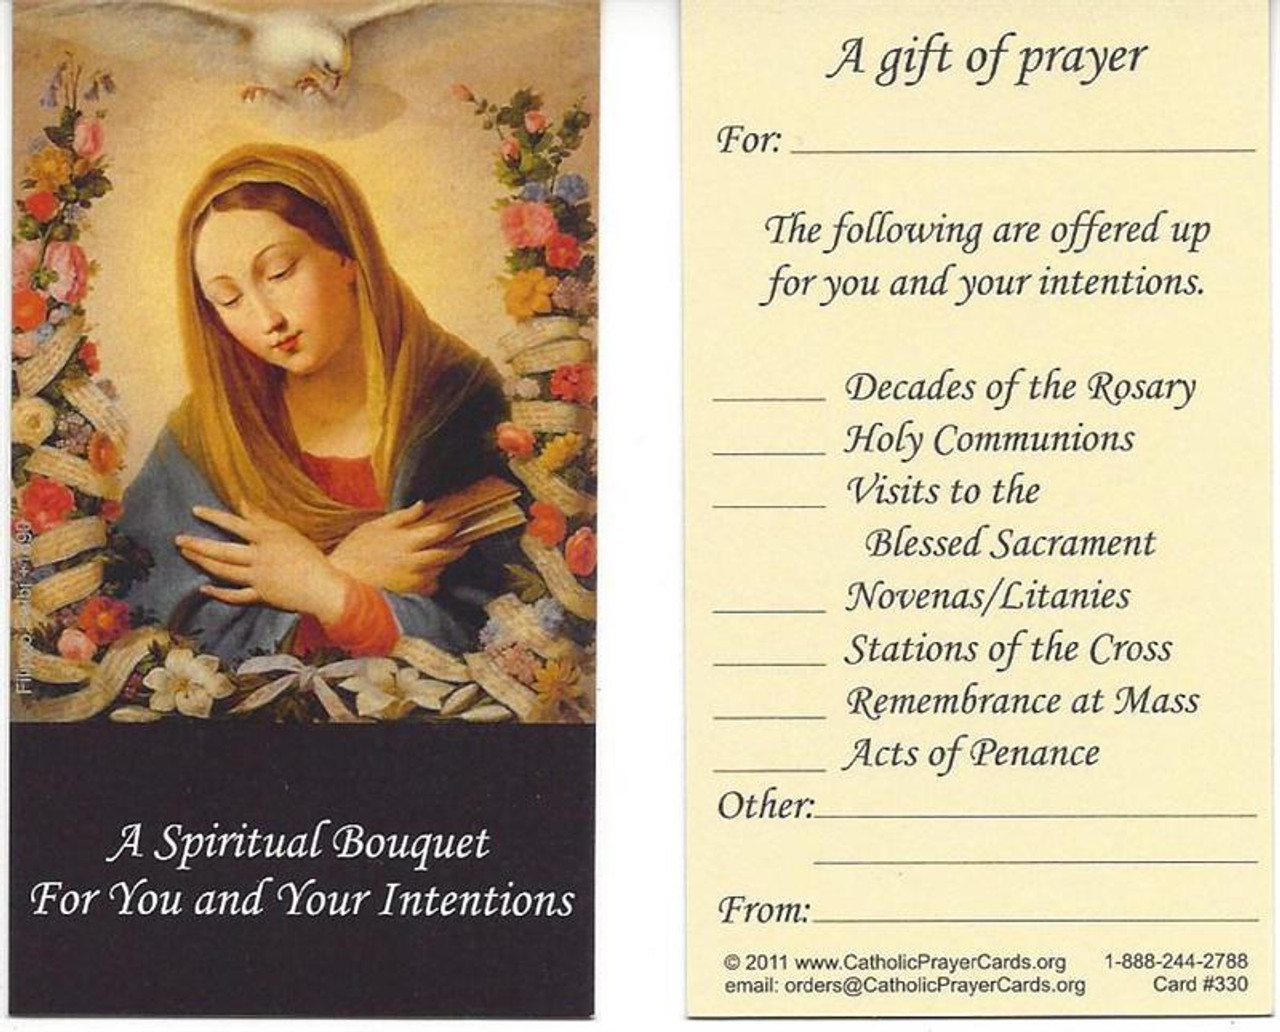 A Spiritual Bouquet For You and Your Intentions Prayer Card